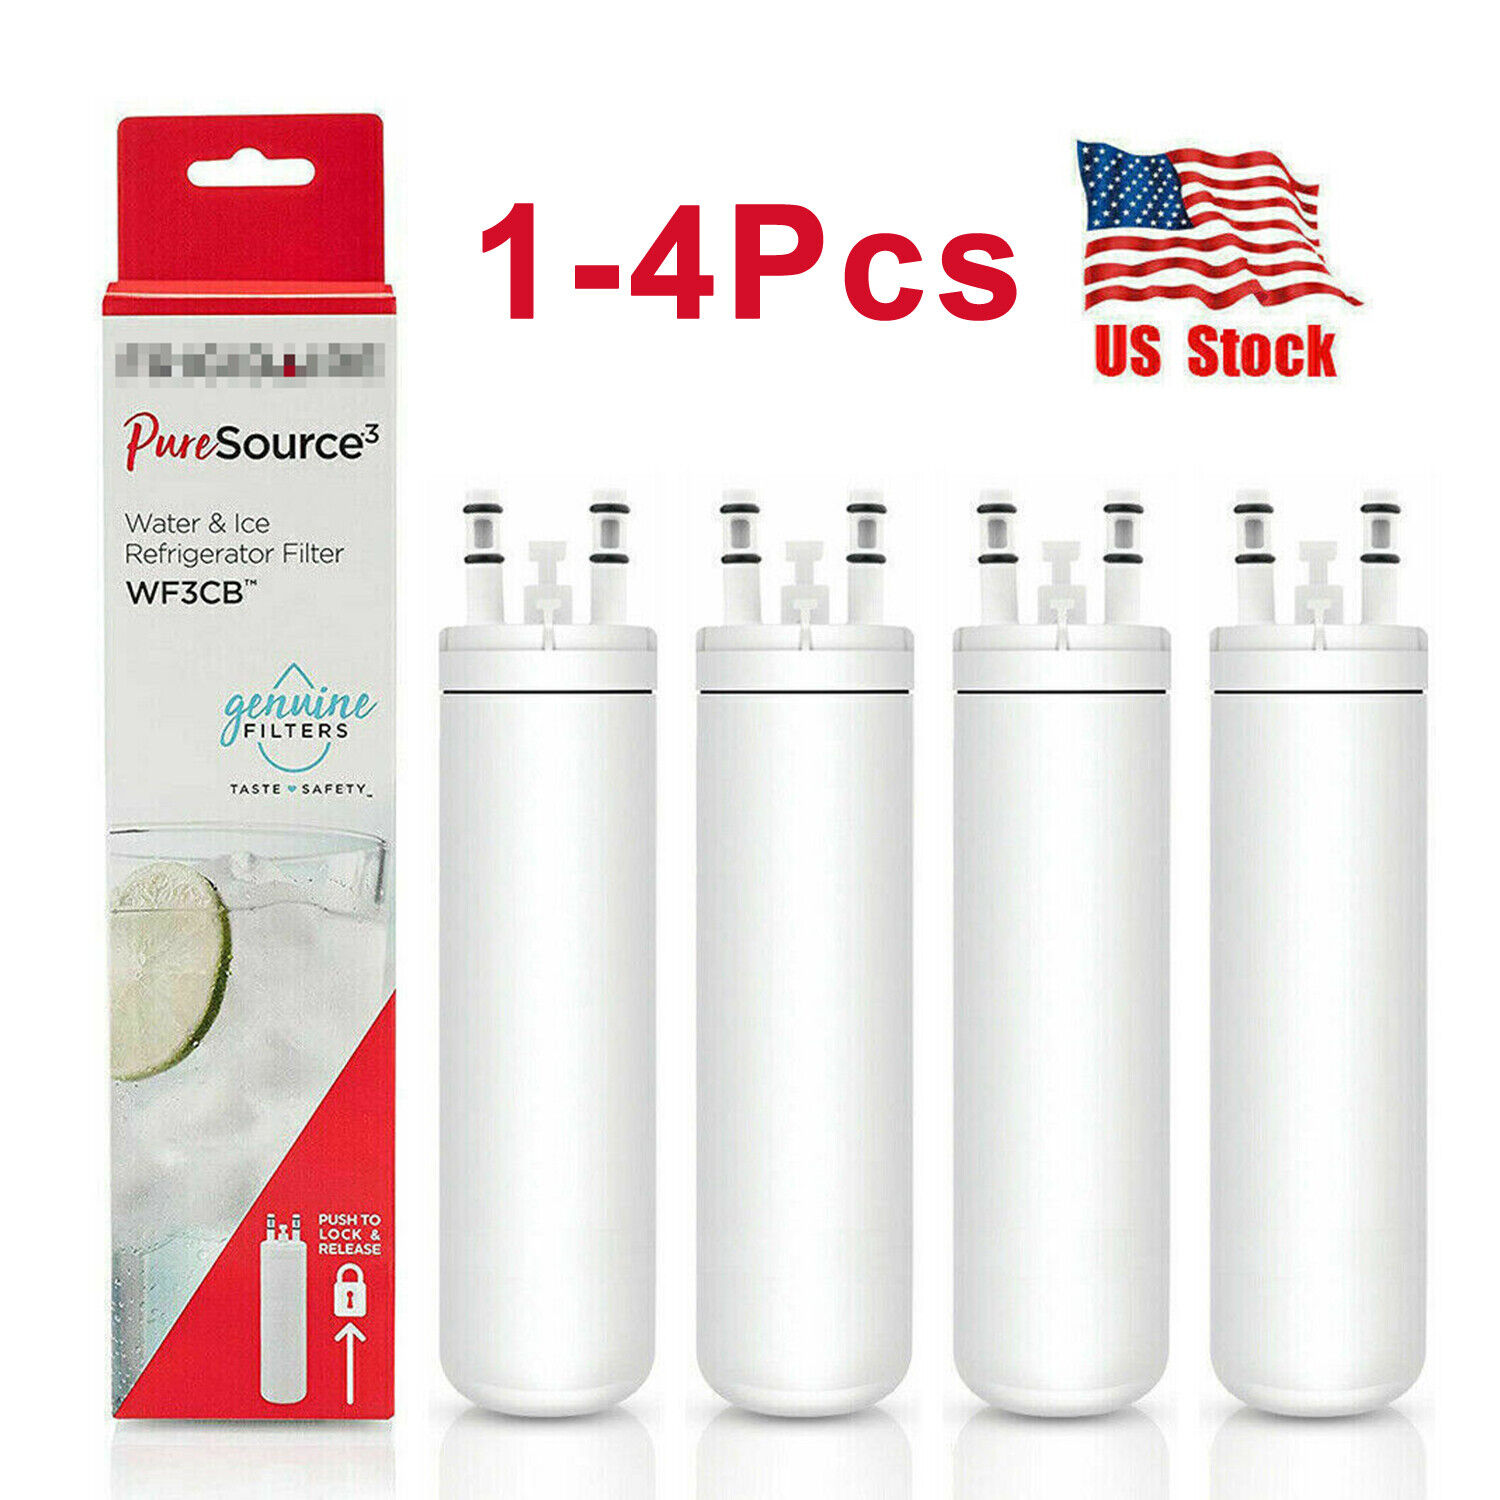 1-4pc Fit Frigidaire WF3CB Refrigerator PureSource 3 Water & Ice Filter US Stock